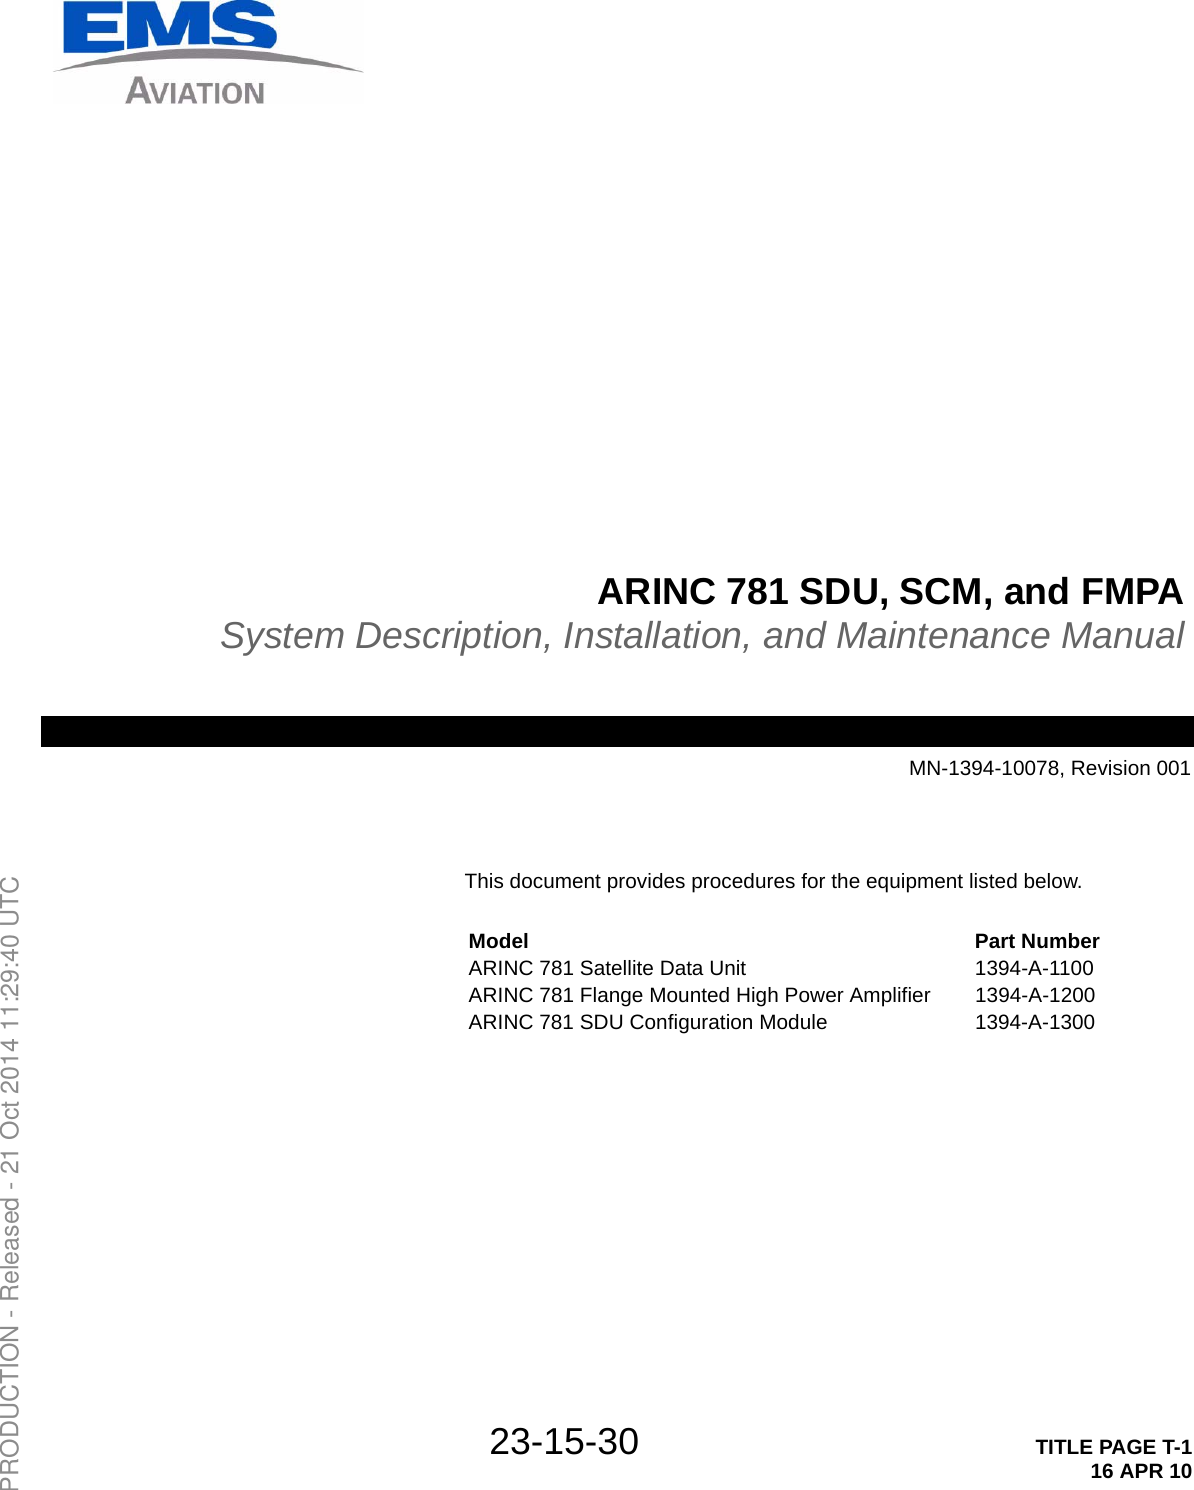 23-15-30 TITLE PAGE T-116 APR 10ARINC 781 SDU, SCM, and FMPASystem Description, Installation, and Maintenance ManualMN-1394-10078, Revision 001This document provides procedures for the equipment listed below.Model Part NumberARINC 781 Satellite Data Unit 1394-A-1100ARINC 781 Flange Mounted High Power Amplifier 1394-A-1200ARINC 781 SDU Configuration Module 1394-A-1300PRODUCTION - Released - 21 Oct 2014 11:29:40 UTC